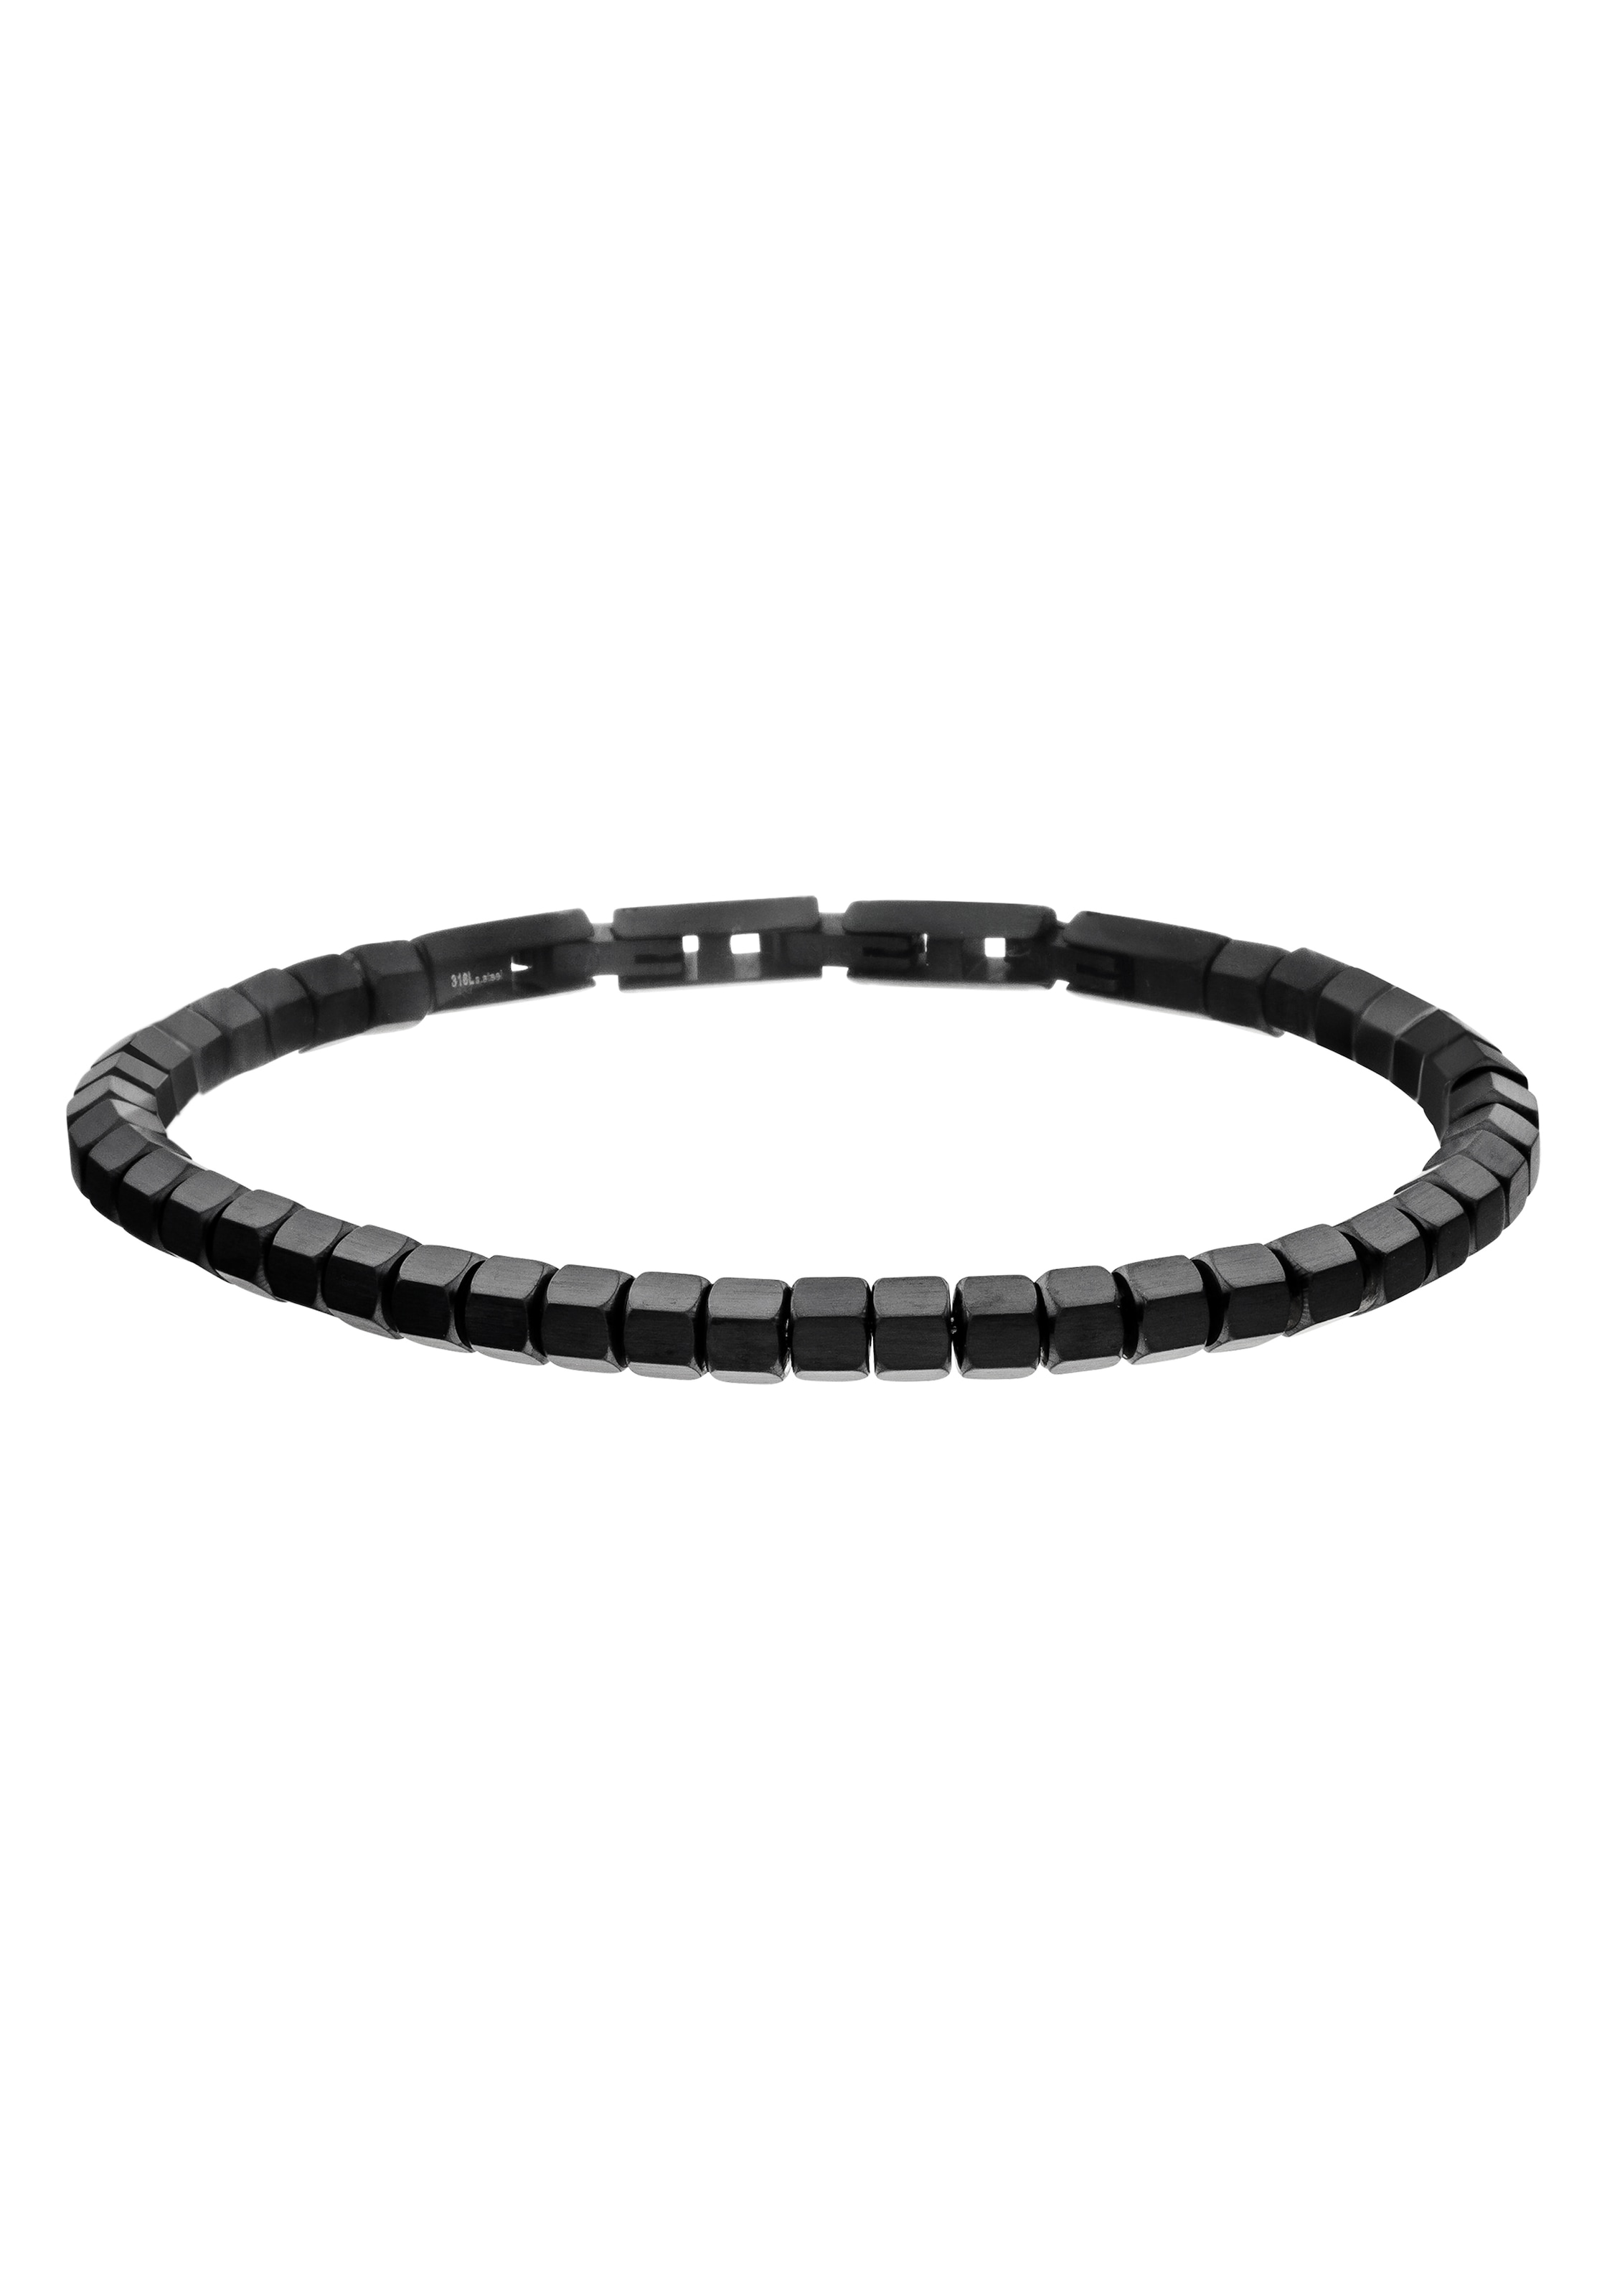 STEELWEAR Armband »Buenos Aires, SW-686, SW-687« online shoppen bei OTTO